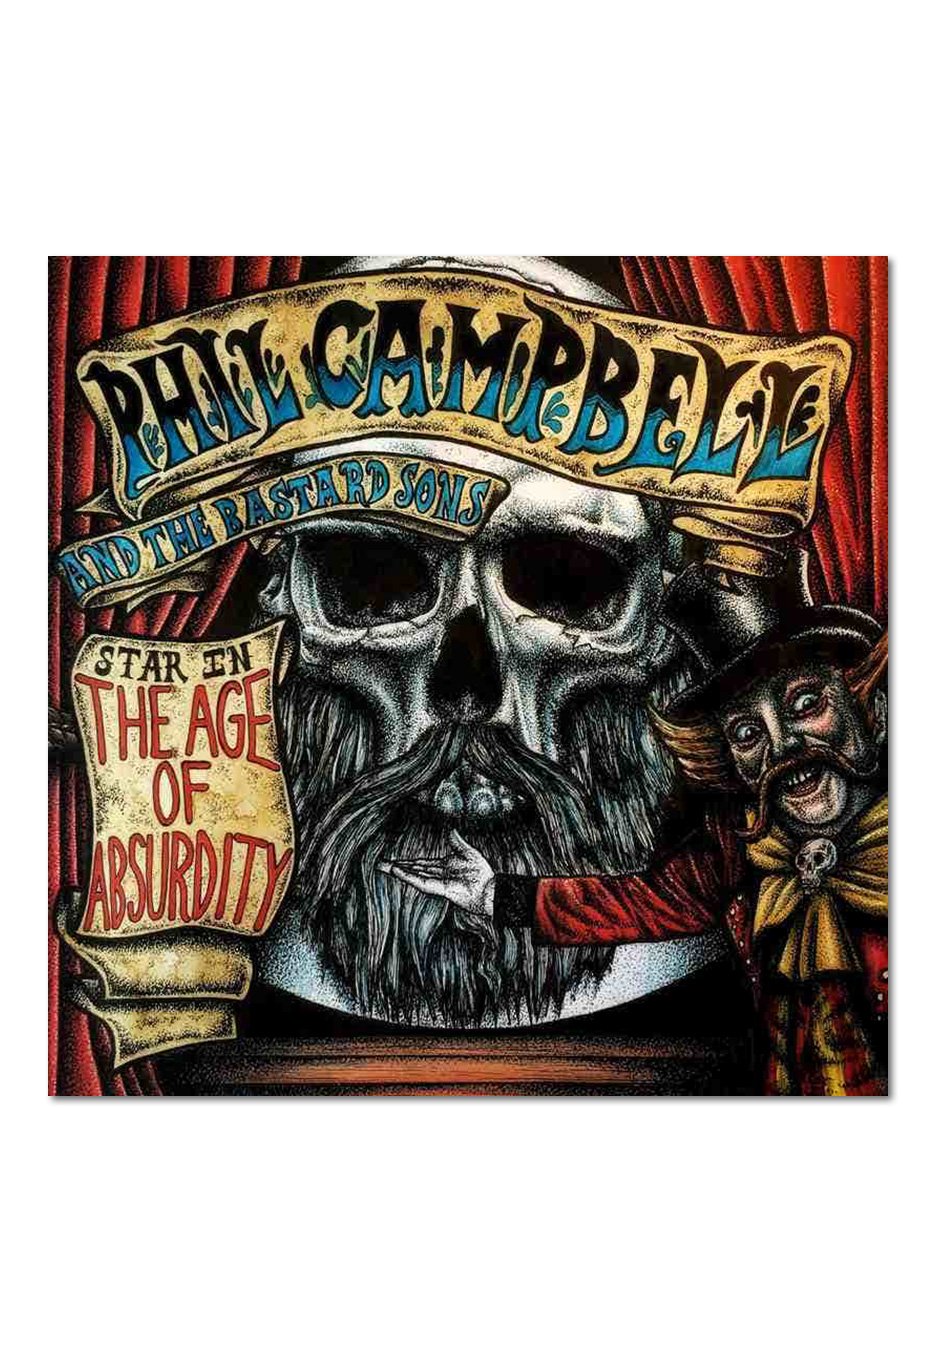 Phil Campbell And The Bastard Sons - The Age Of Absurdity - CD